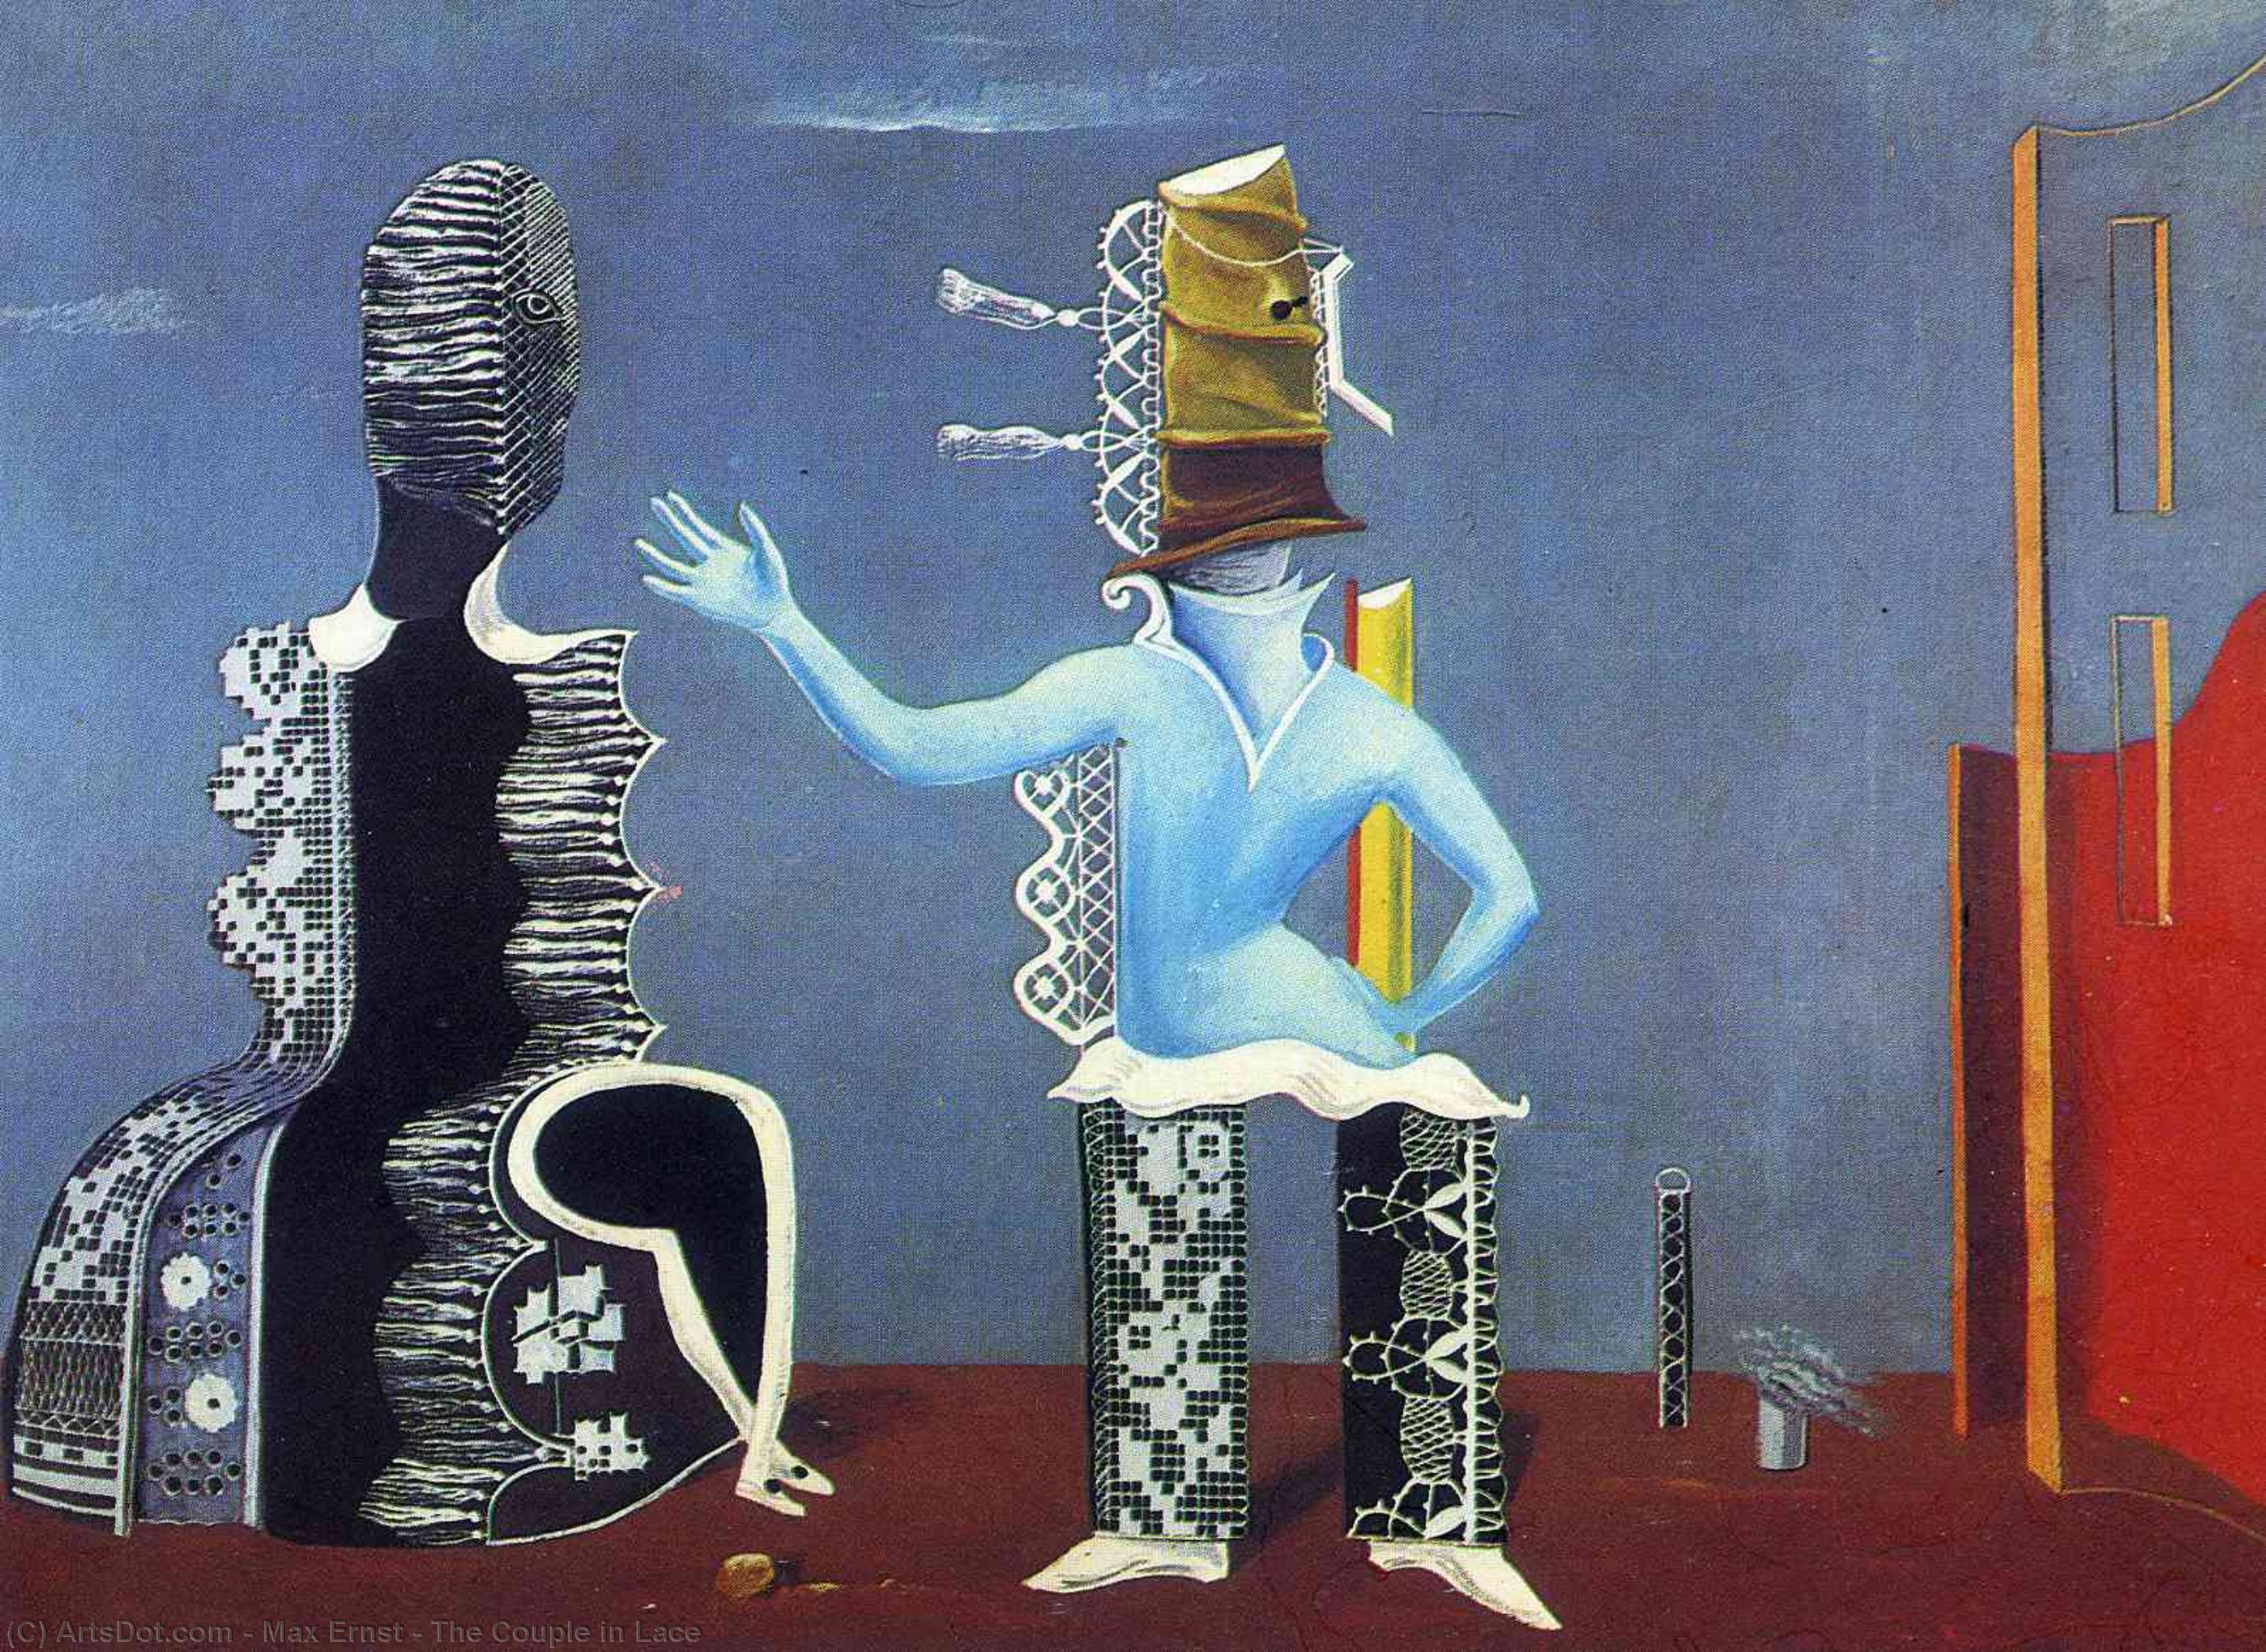 WikiOO.org - 백과 사전 - 회화, 삽화 Max Ernst - The Couple in Lace